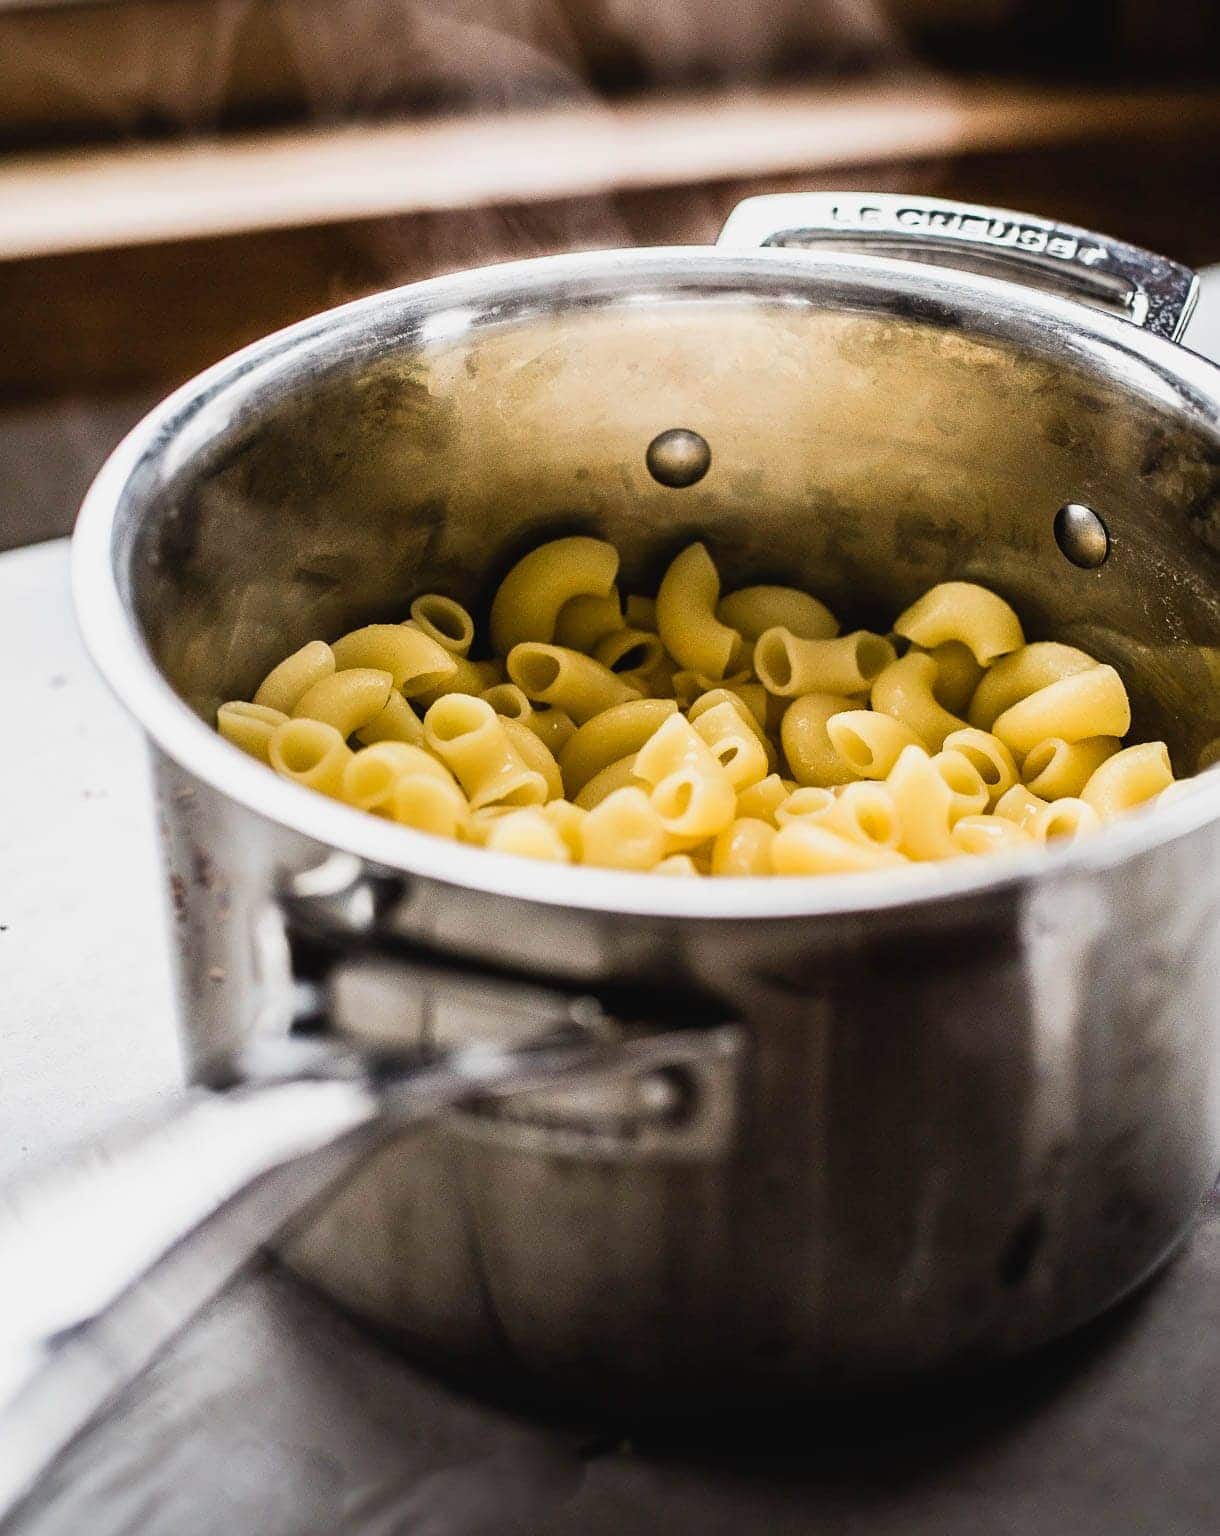 macaroni noodles steaming in a pot